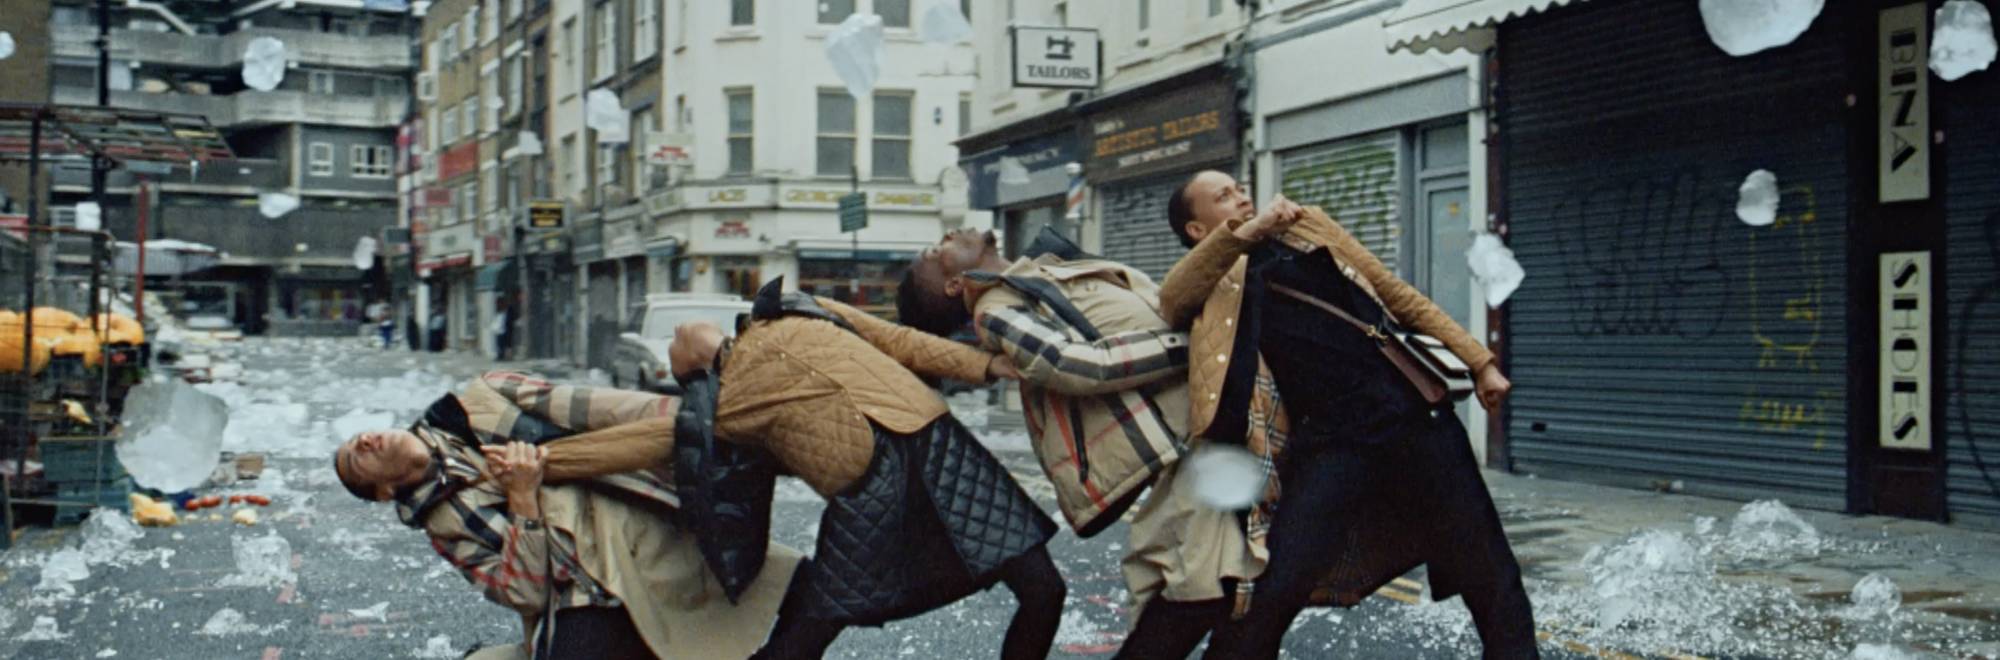 Singing in the rain and dancing in the street brings Burberry bang up to date